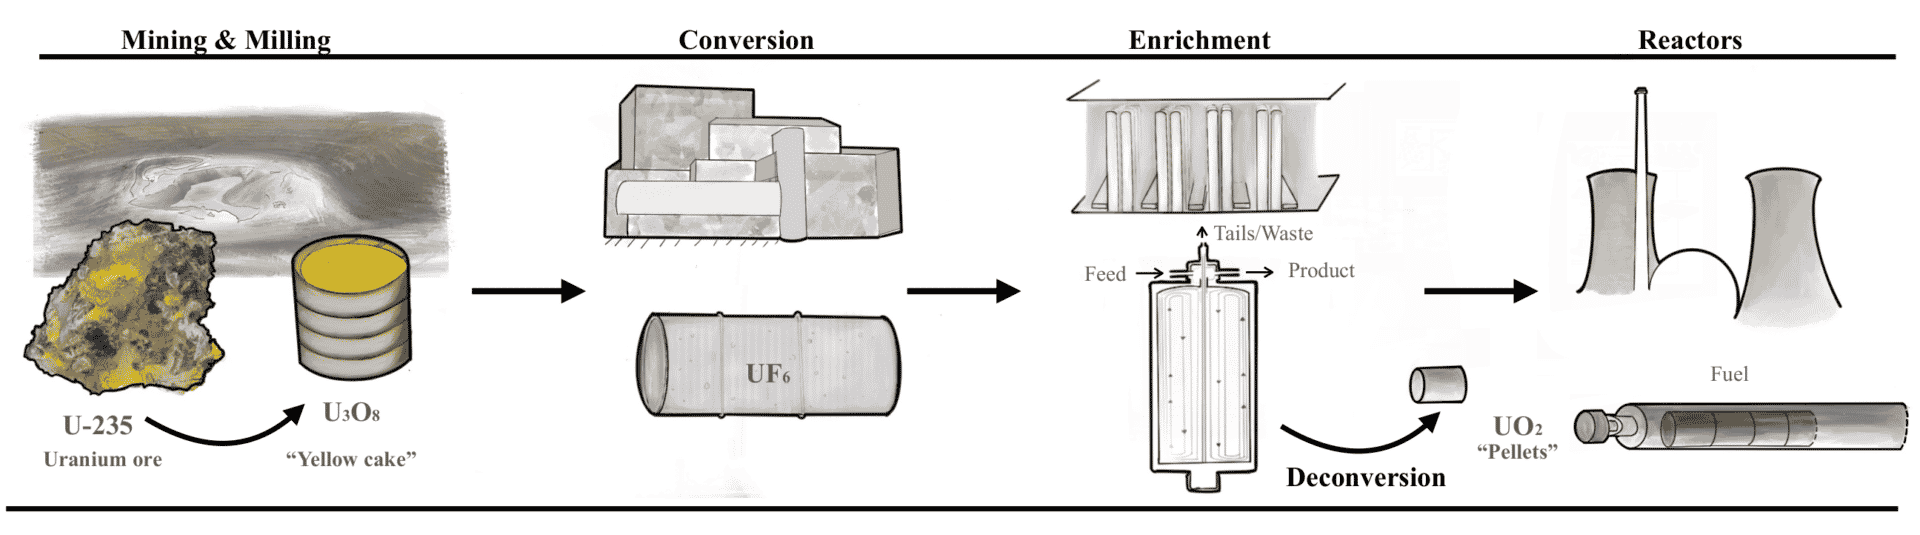 Figure 2 - The “once-through” fuel cycle used in the United States.